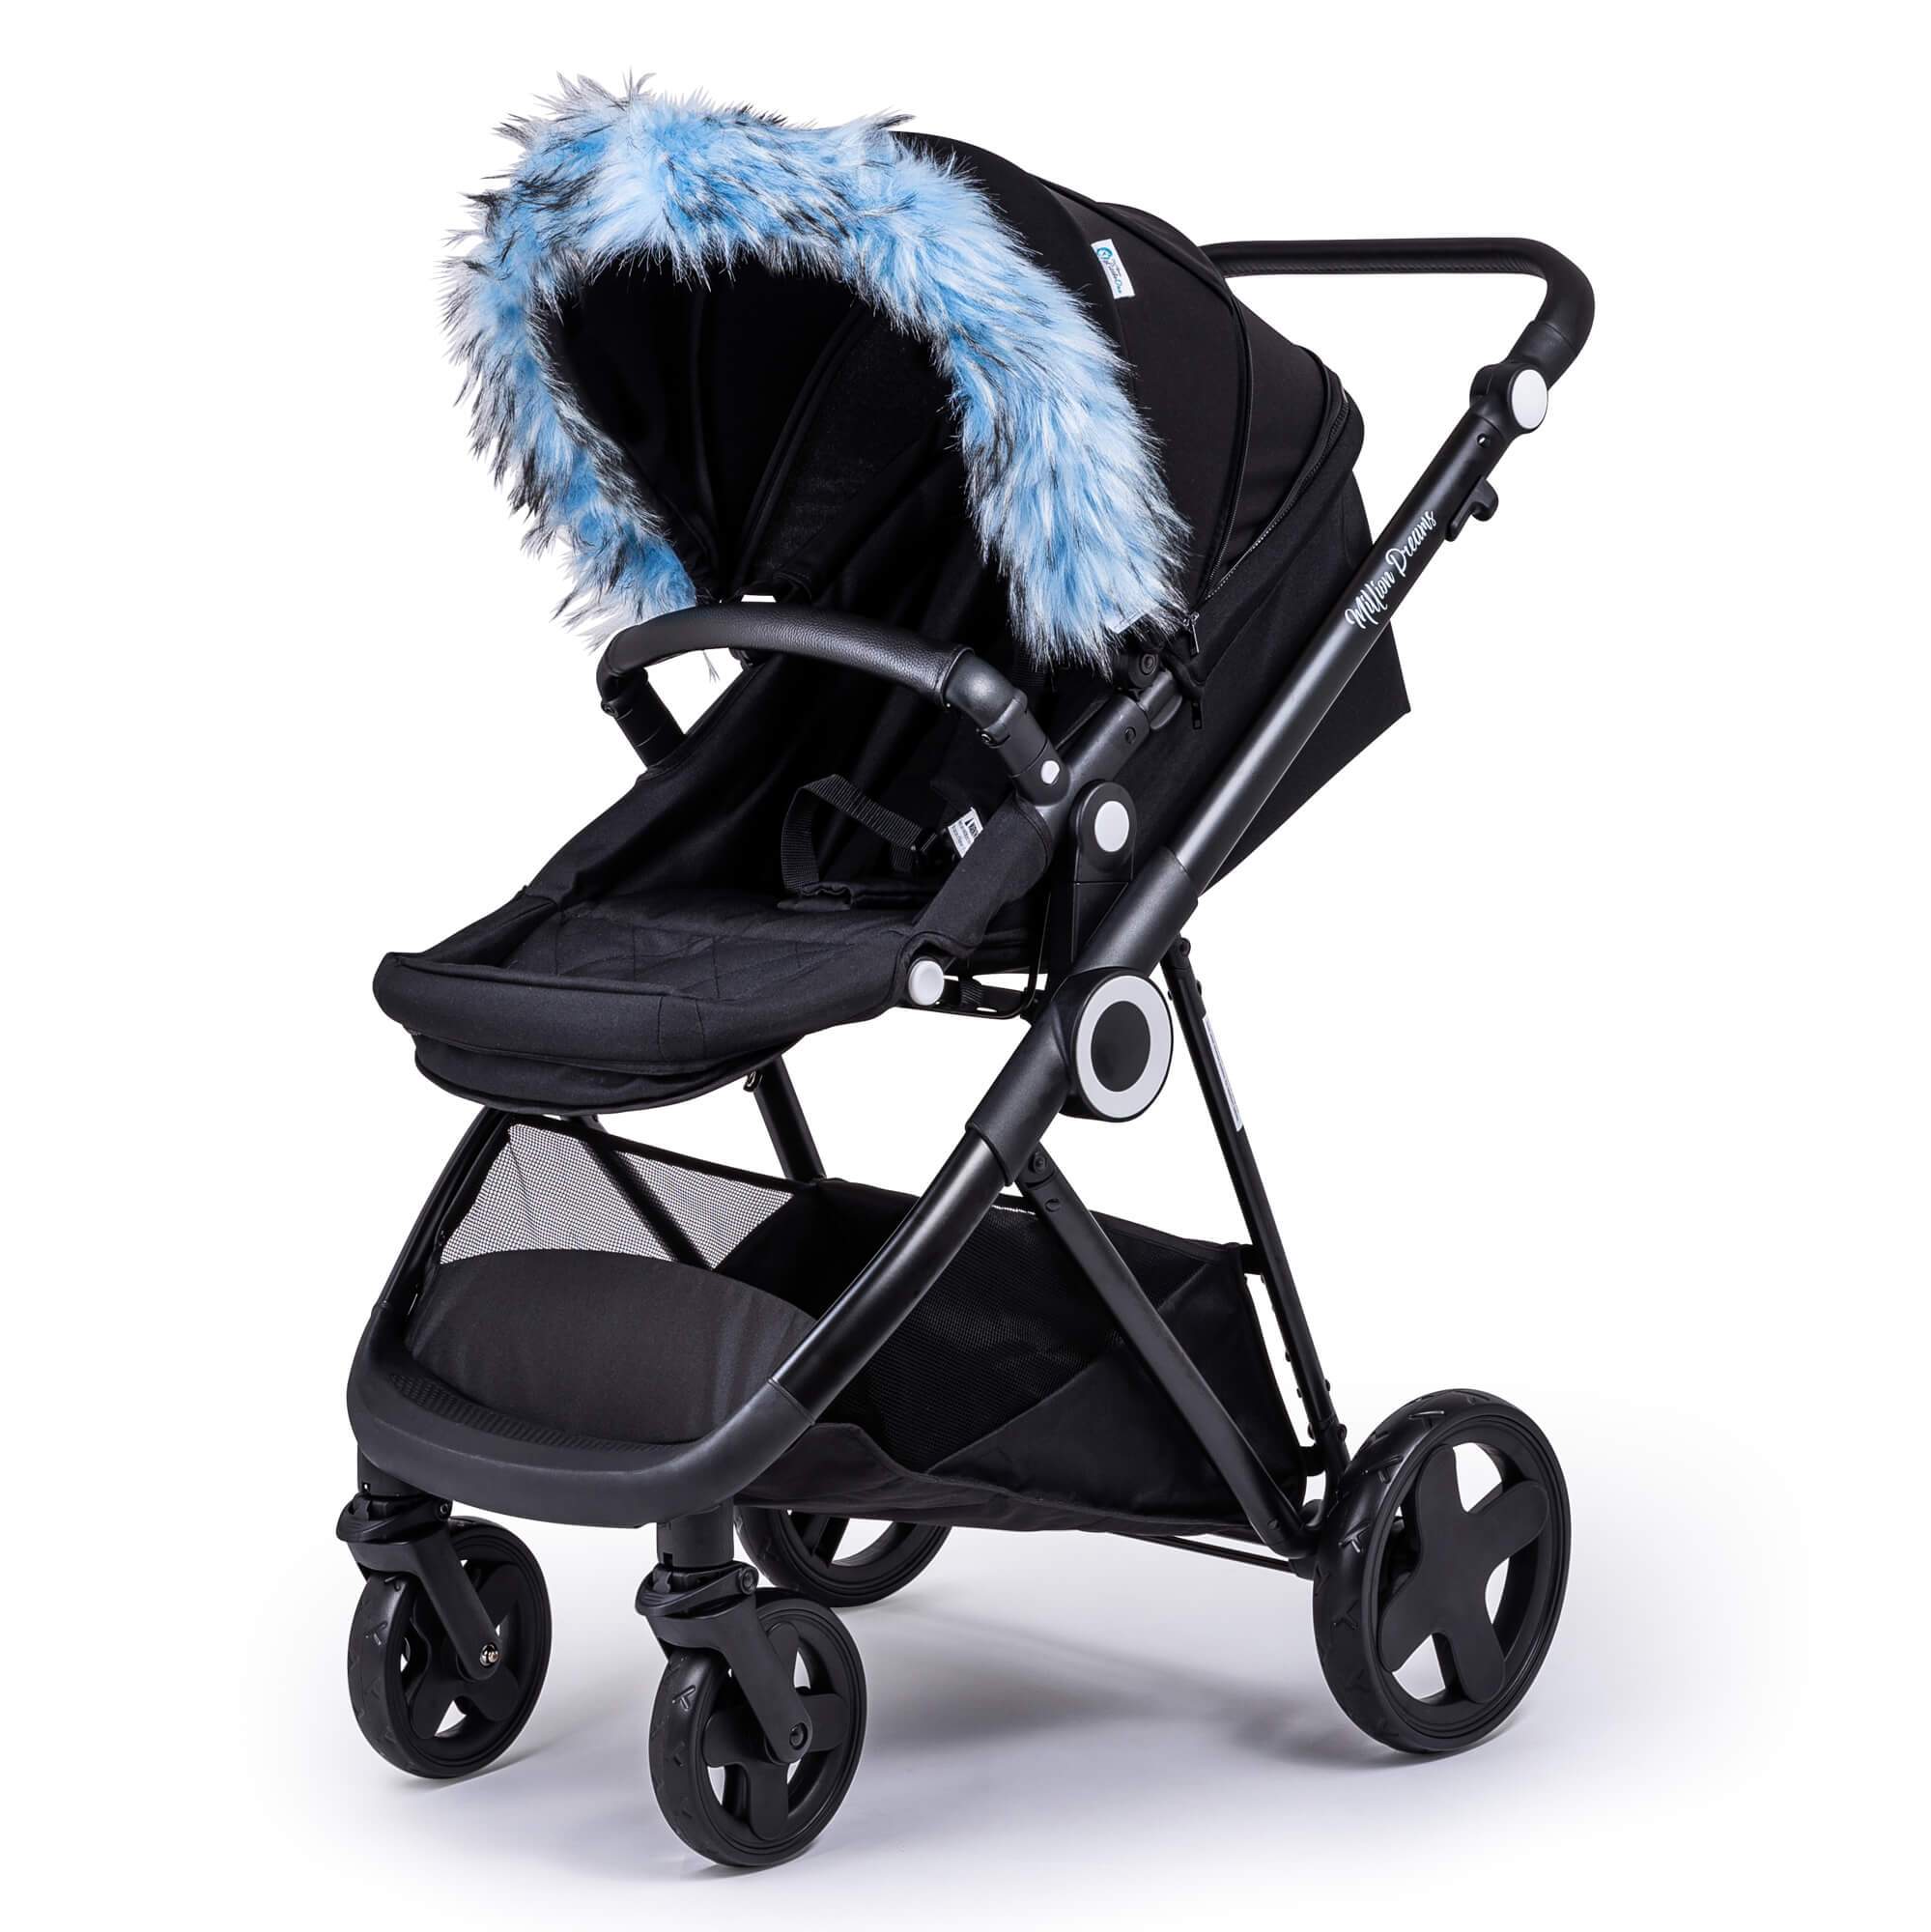 Pram Fur Hood Trim Attachment for Pushchair Compatible with Brio - Light Blue / Fits All Models | For Your Little One